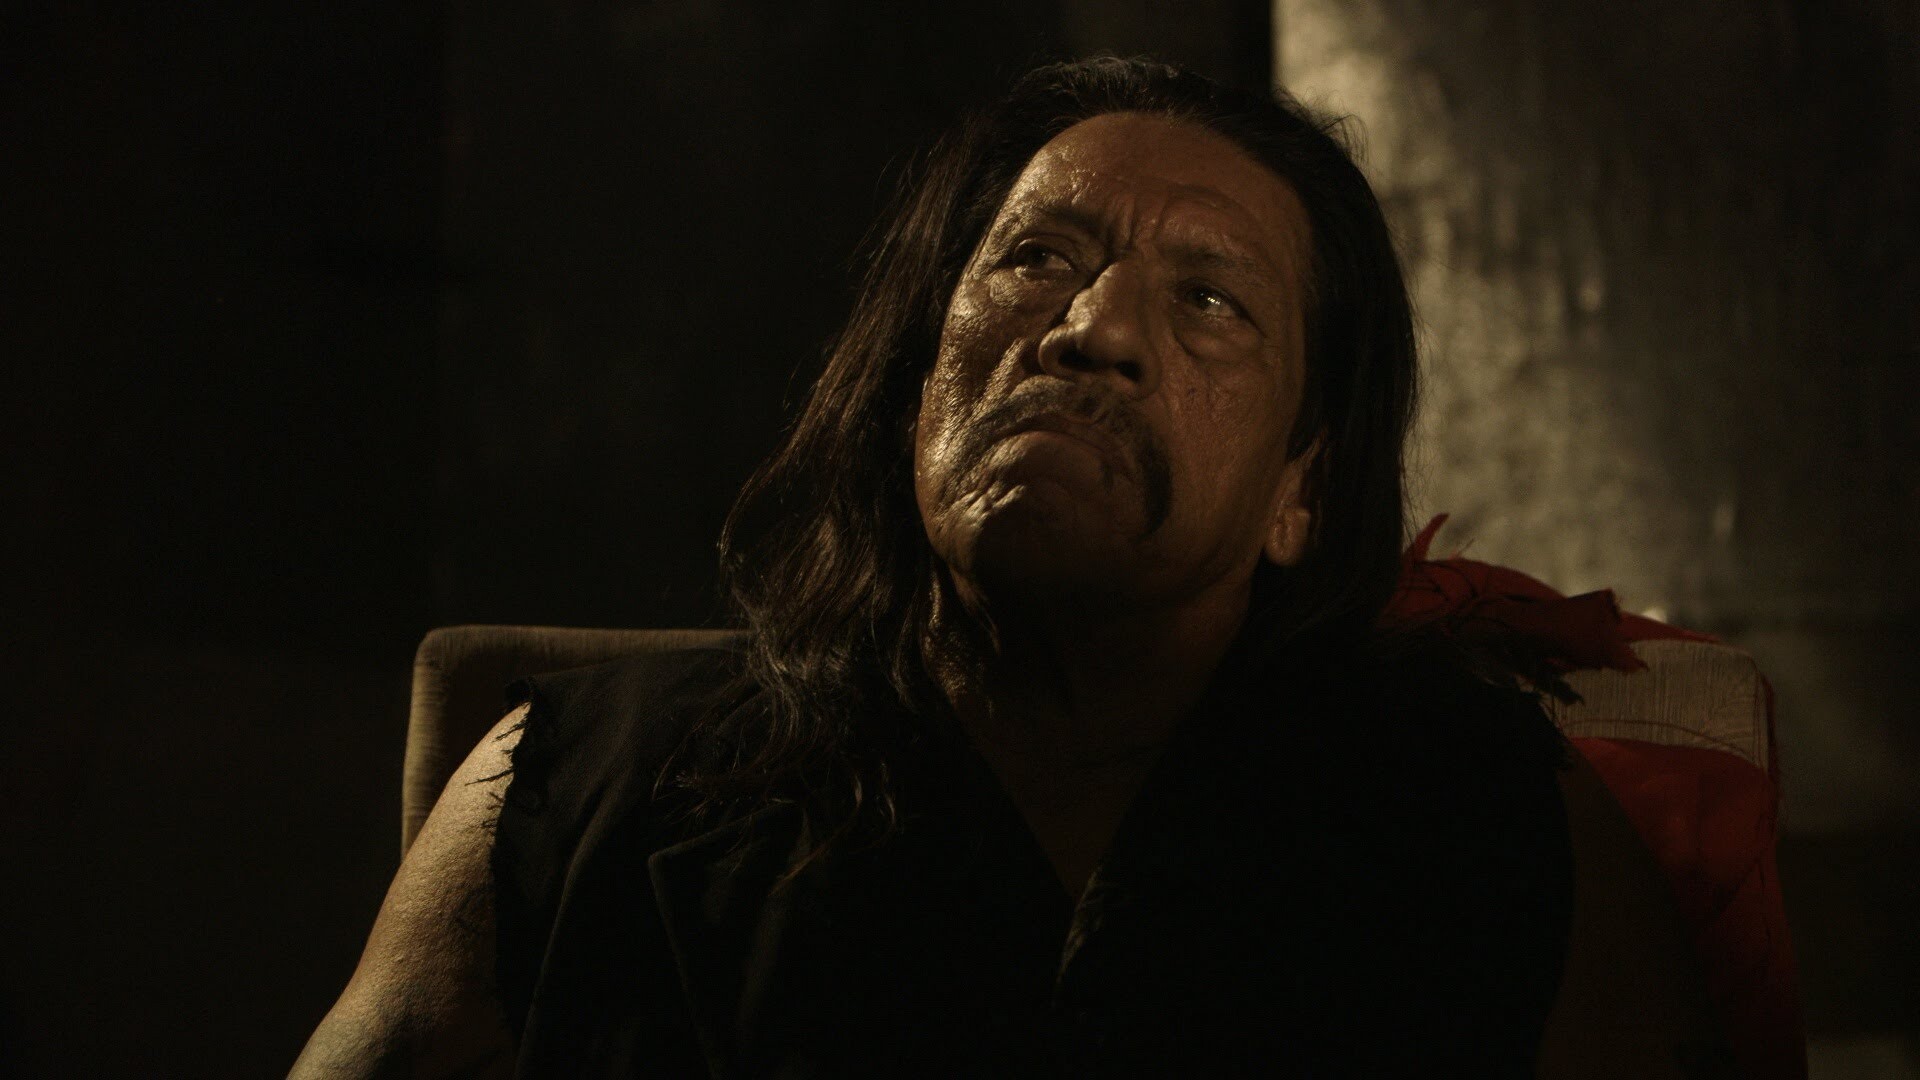 Danny Trejo: Redemption: The Darkness Descending, A 2013 American horror film directed by Marc Clebanoff. 1920x1080 Full HD Wallpaper.